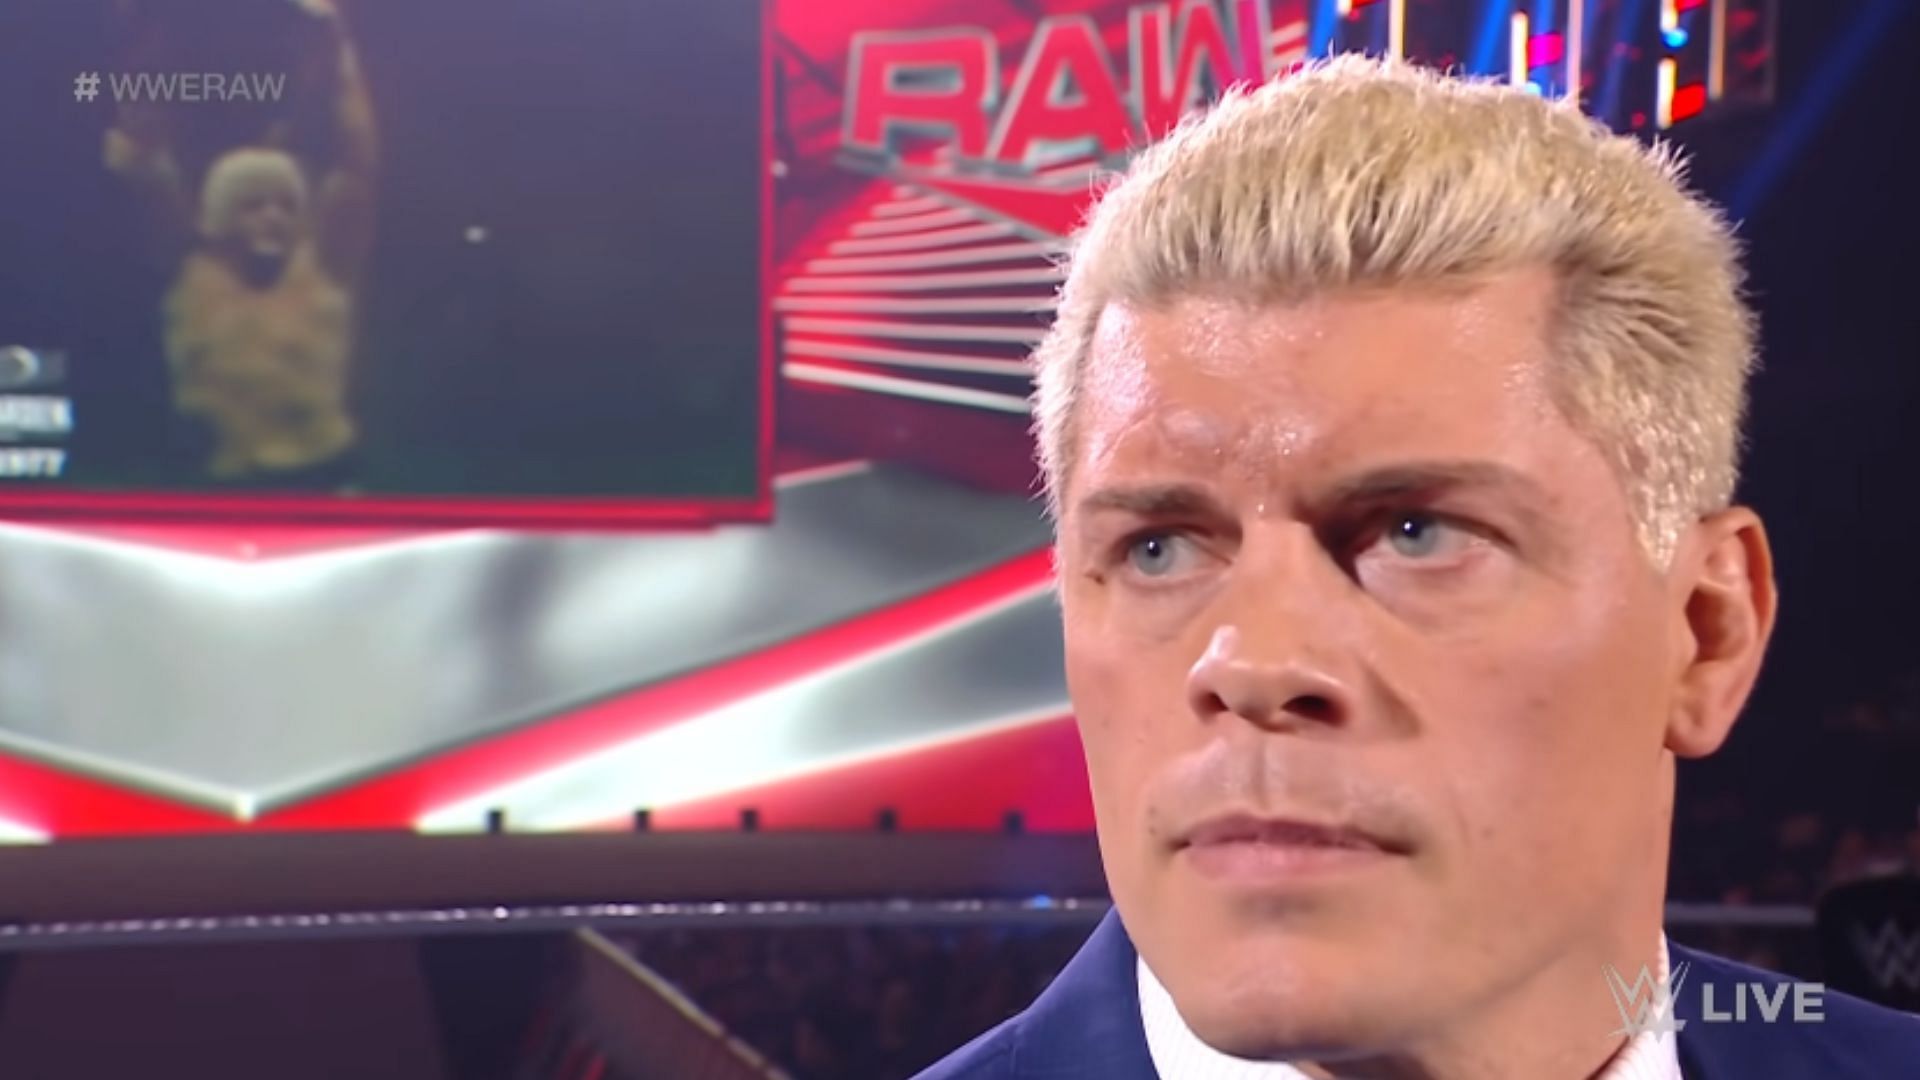 Cody Rhodes has set his sights on challenging Roman Reigns